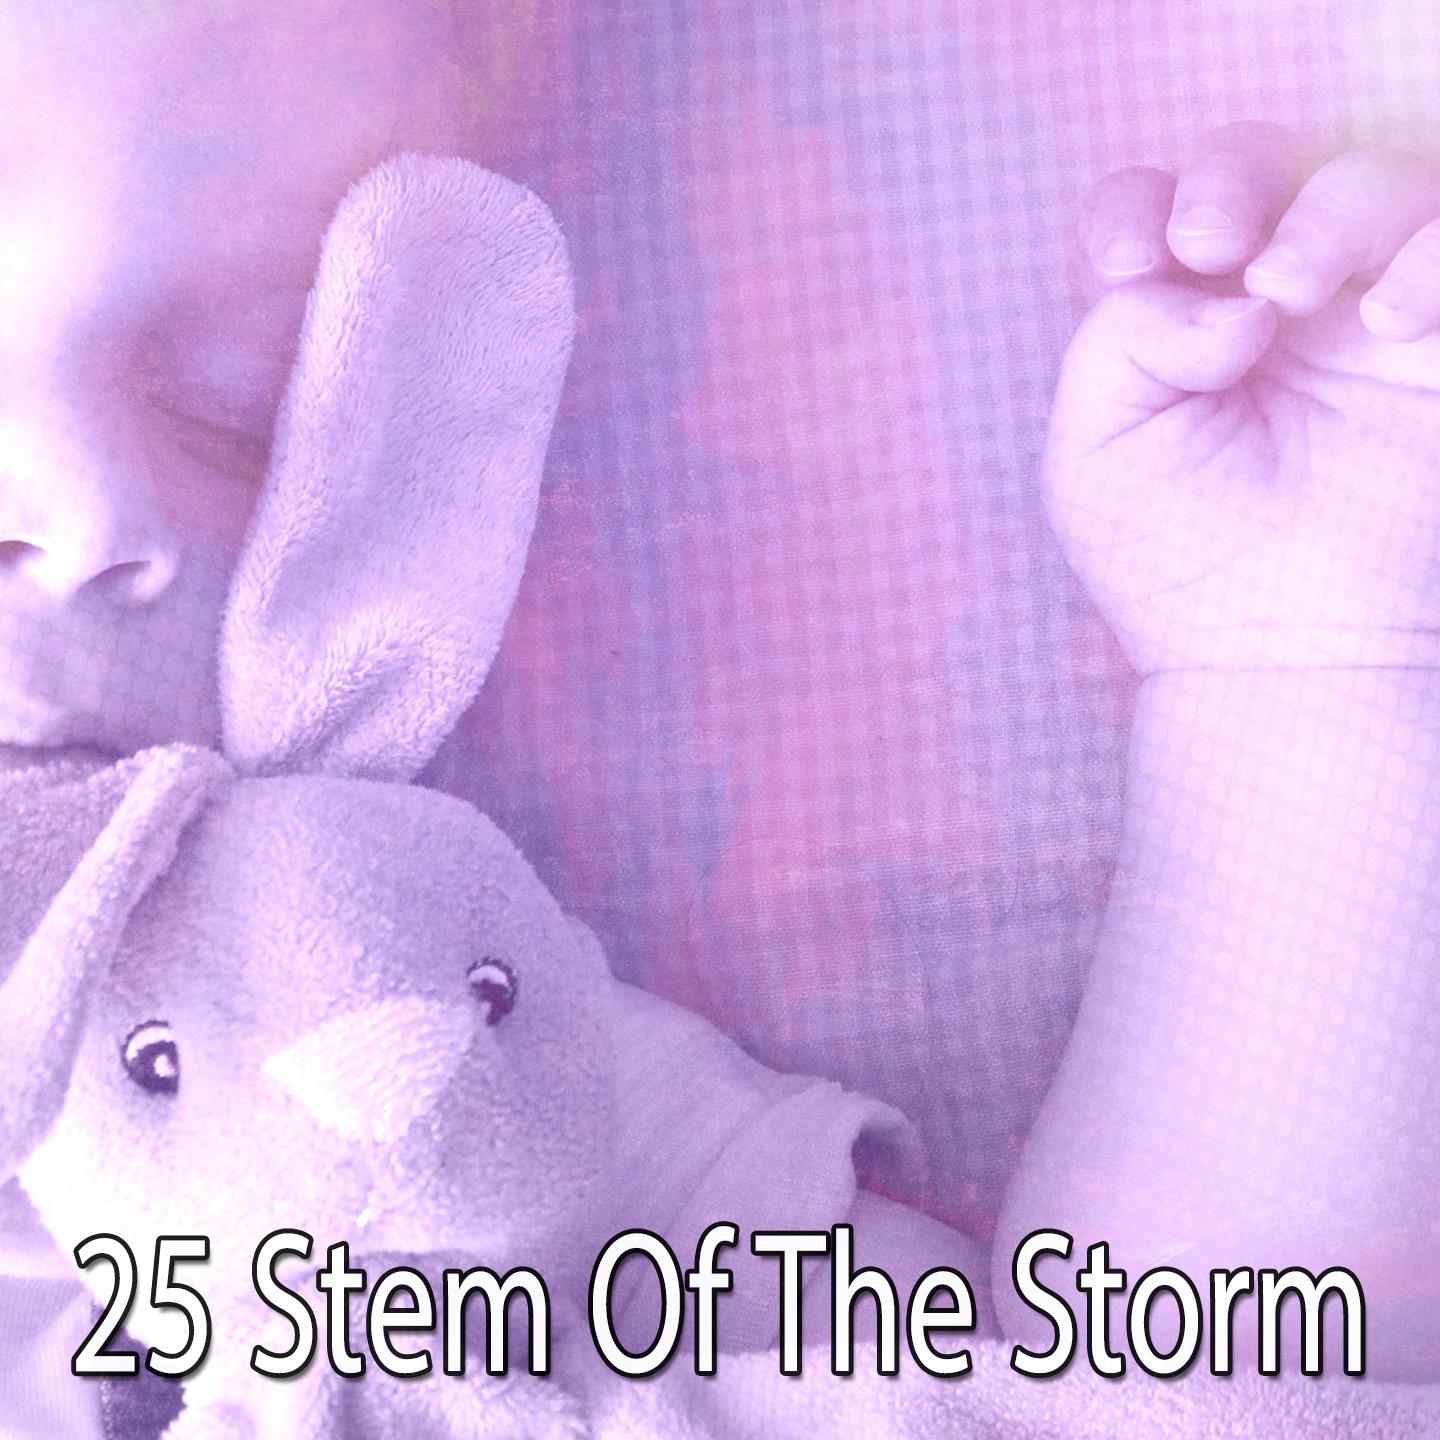 25 Stem of the Storm